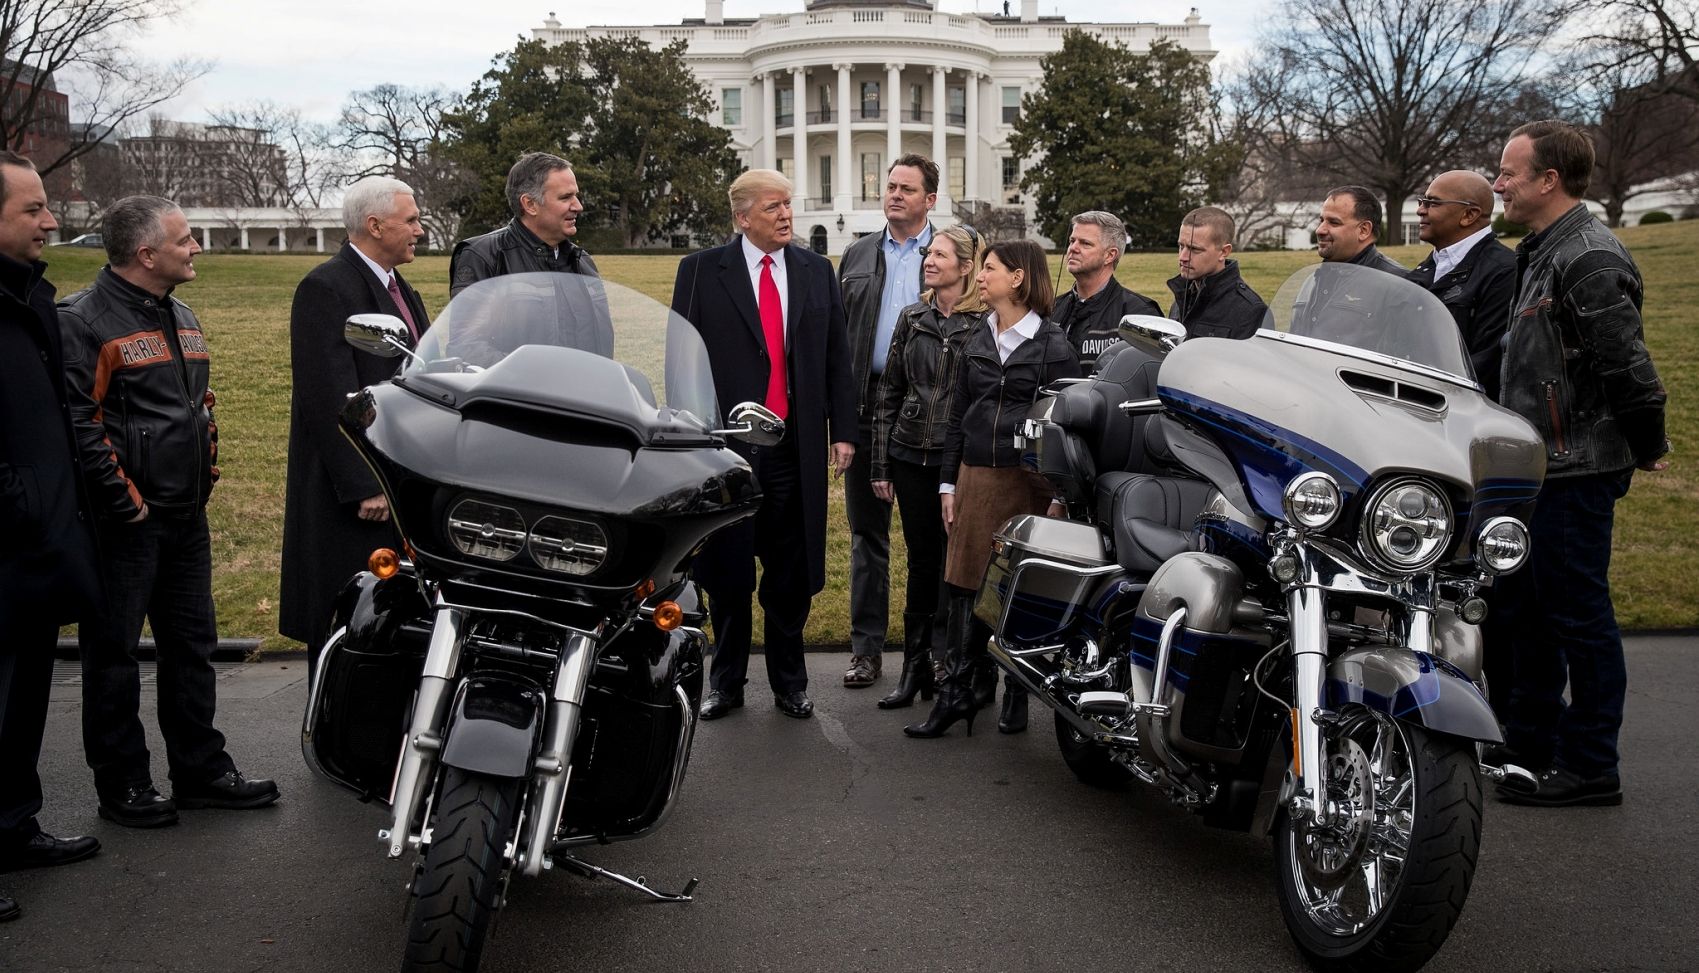 Trump Harley Davidson in Front of Whitehouse